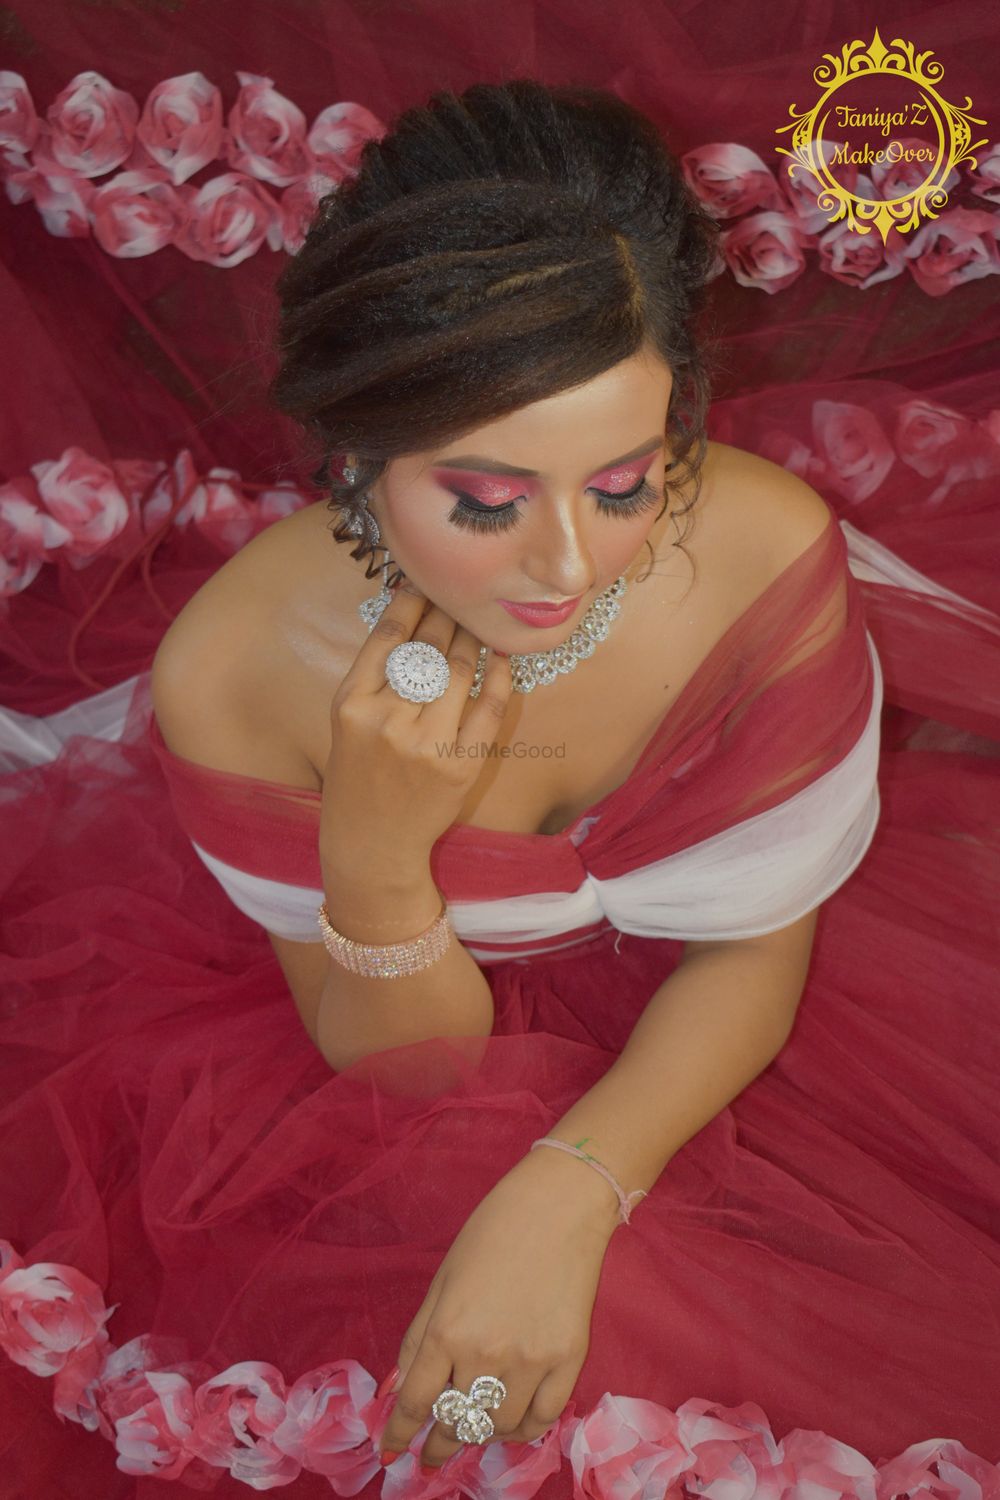 Photo From HIGH FASHION LOOK - By Taniya'Z MakeOver Studio & Academy